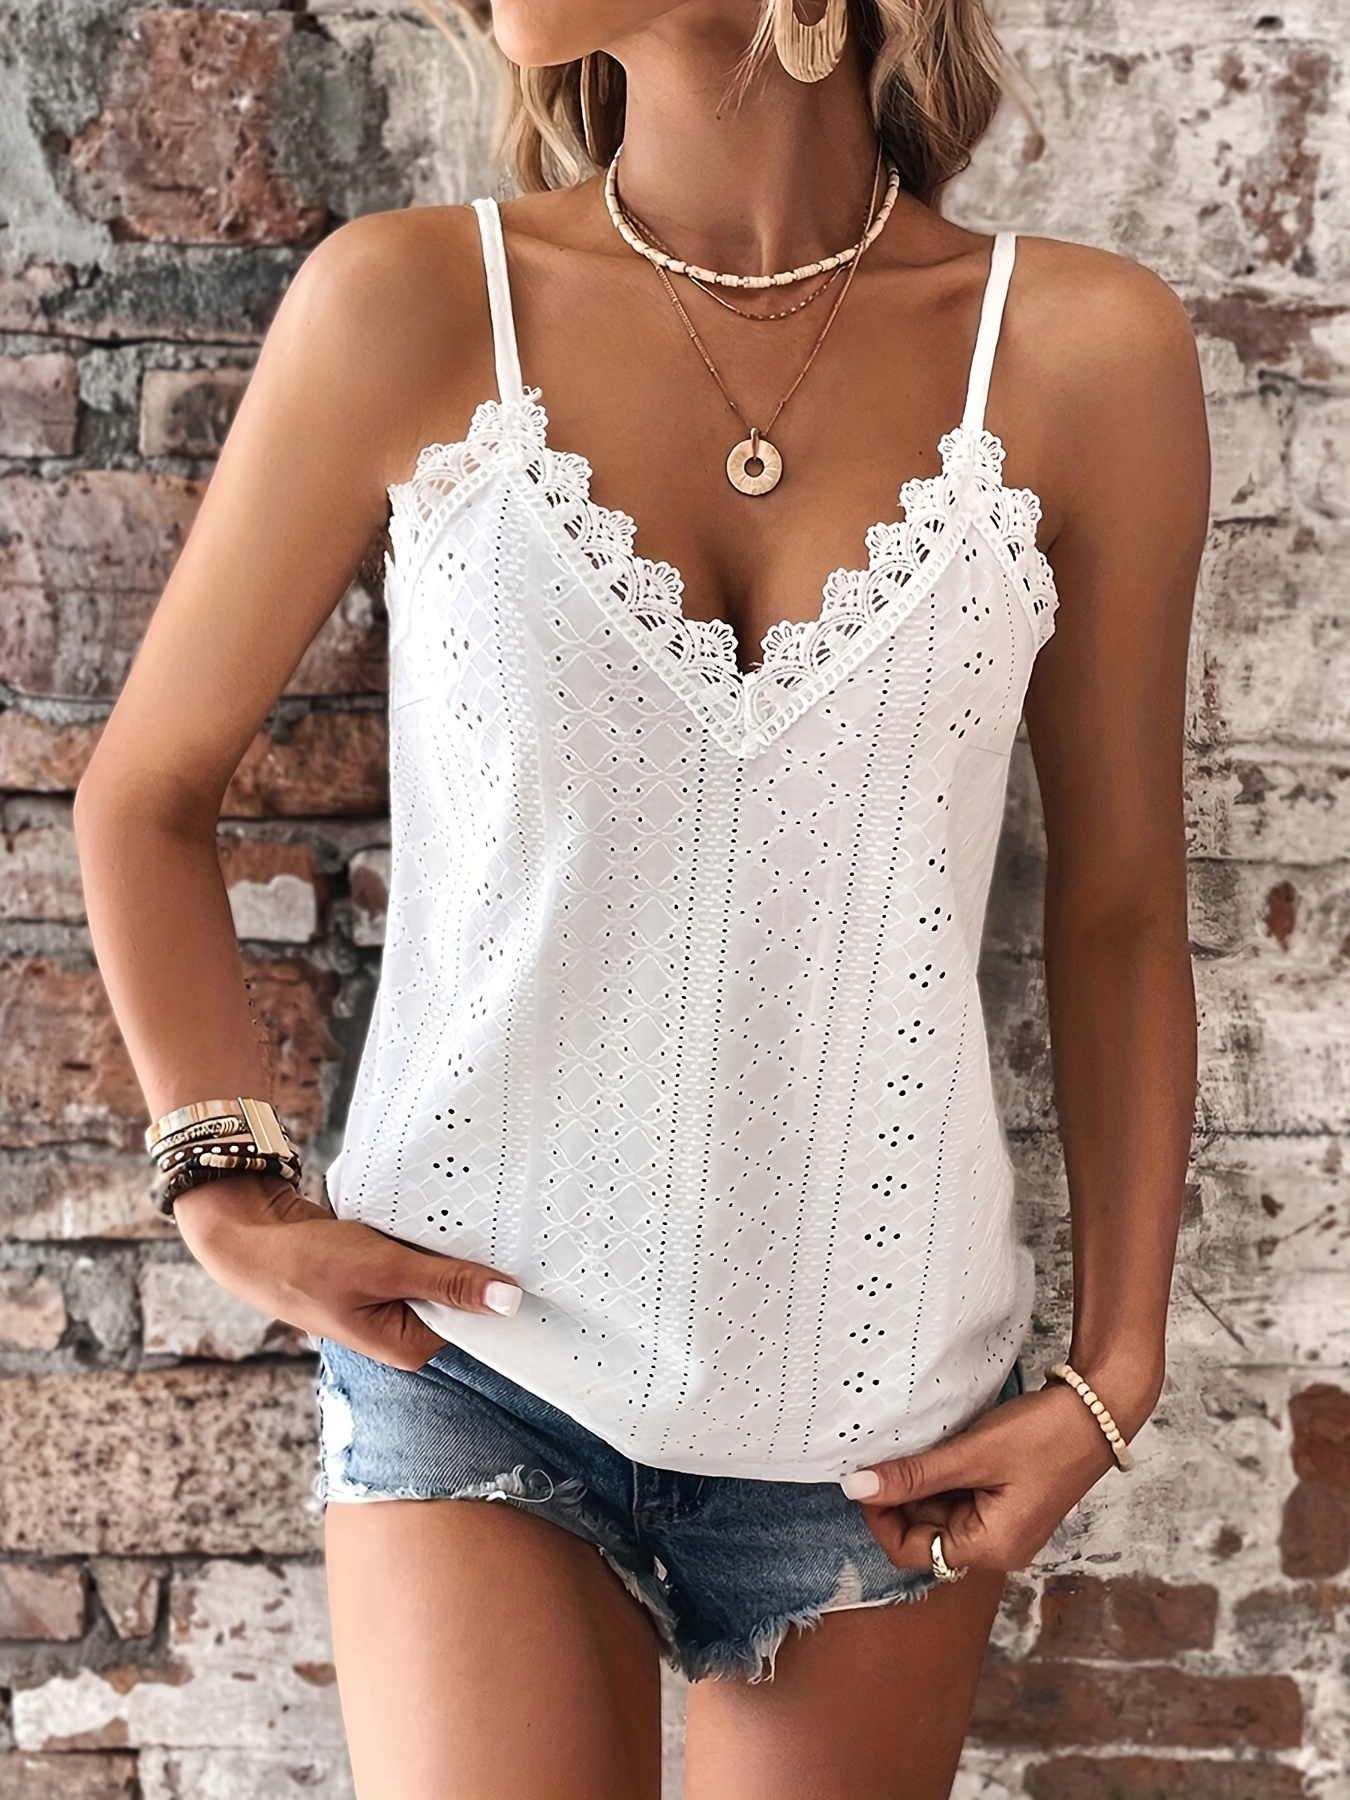 Contrast Lace Stripe Textured Spaghetti Strap Top, Casual V-neck Sleeveless  Cami Top For Summer, Women's Clothing